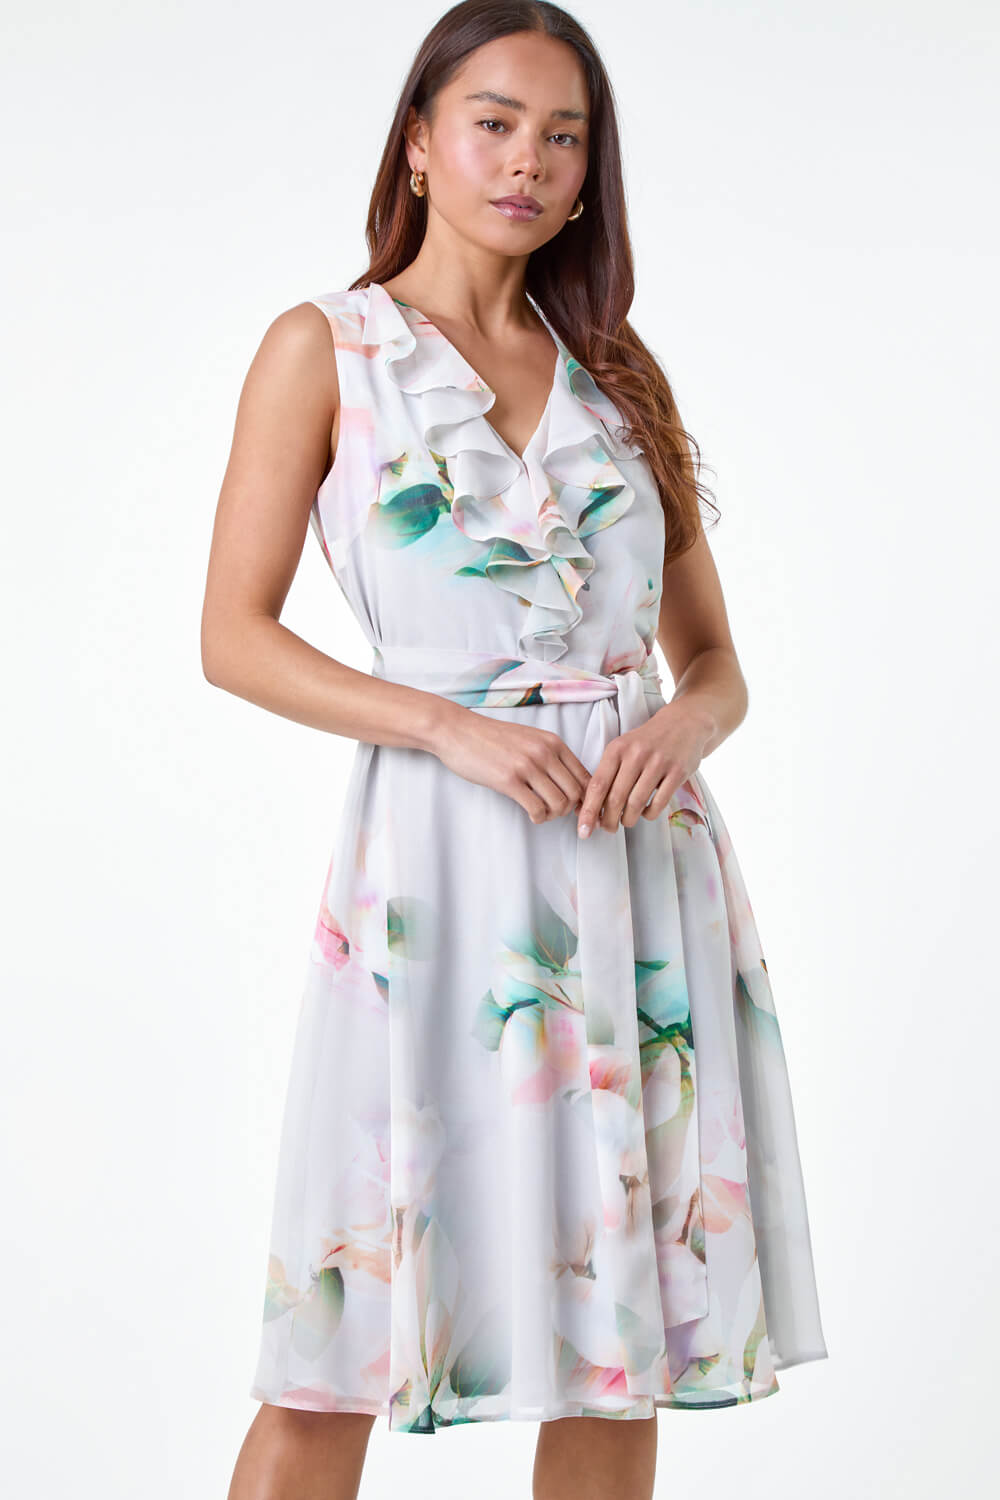 Grey Petite Frill Detail Floral Dress, Image 4 of 5